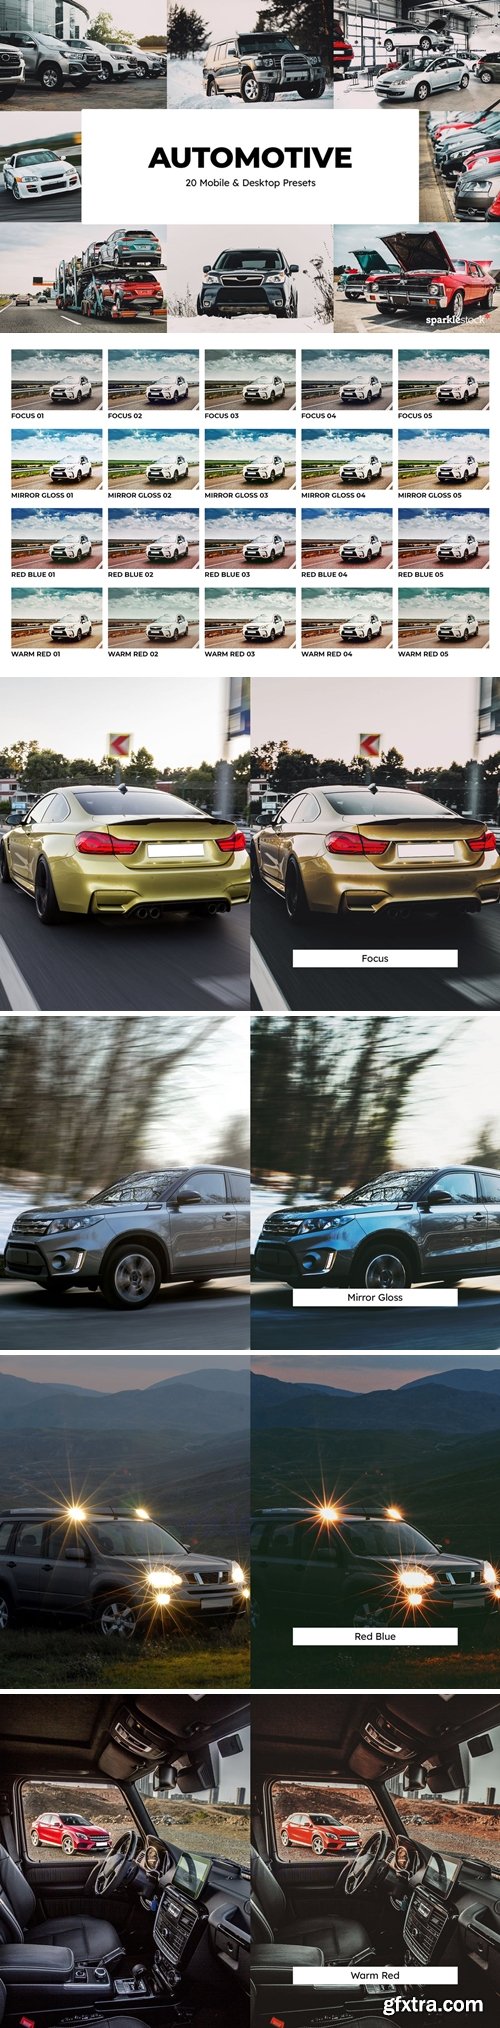 20 Automotive Lightroom Presets and LUTs